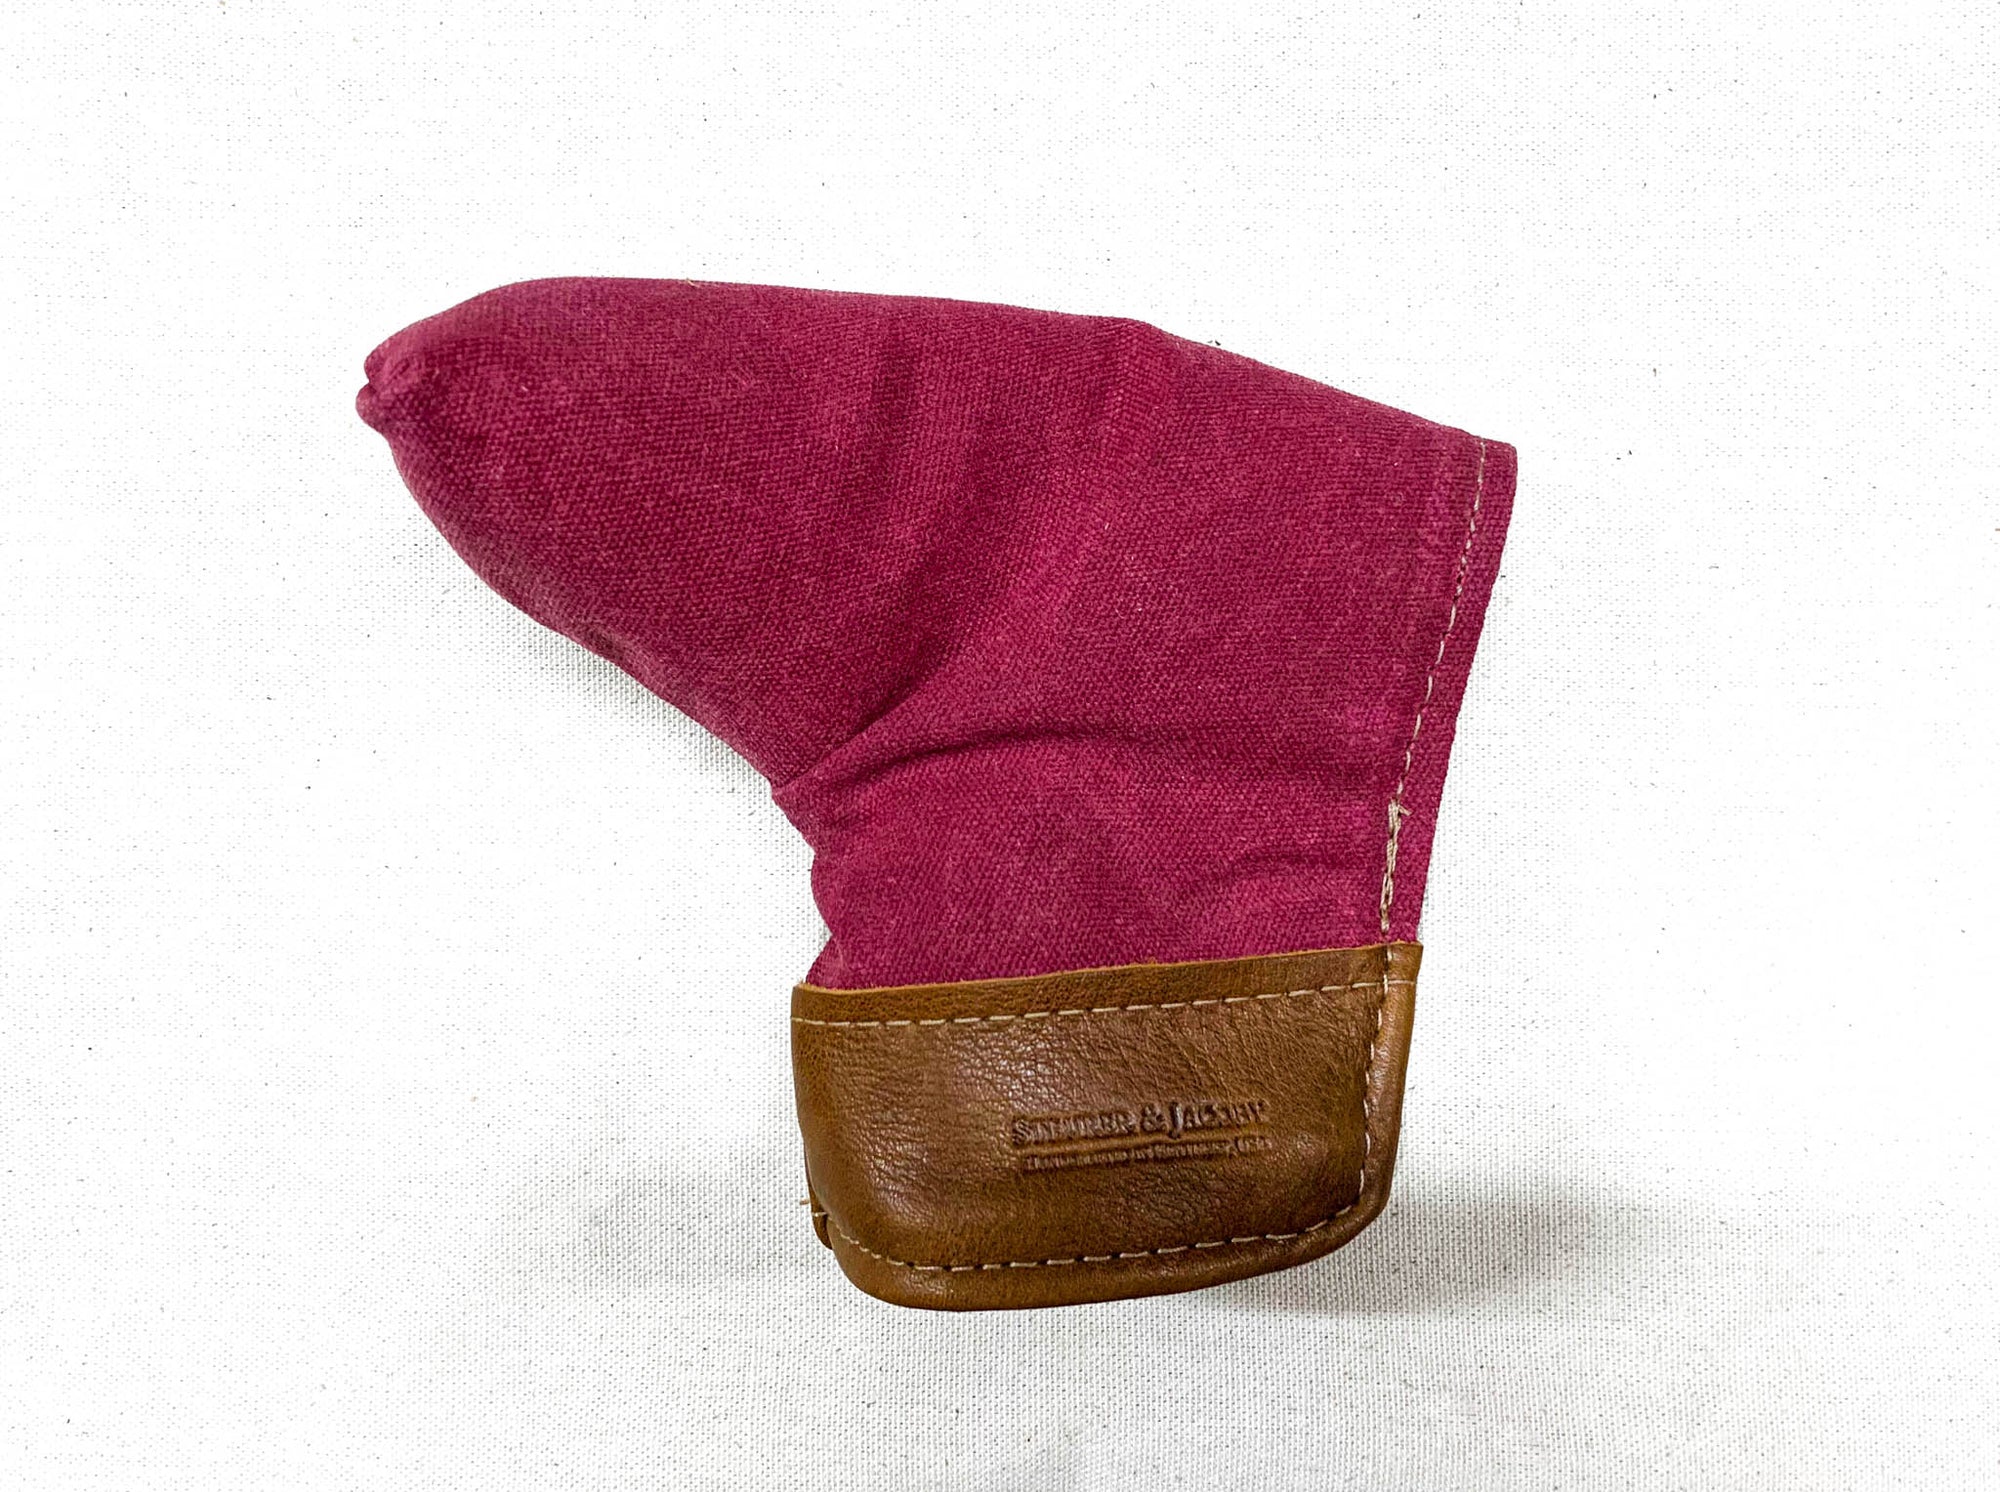 Burgundy Waxed Cotton Duck Putter Cover- Steurer & Jacoby